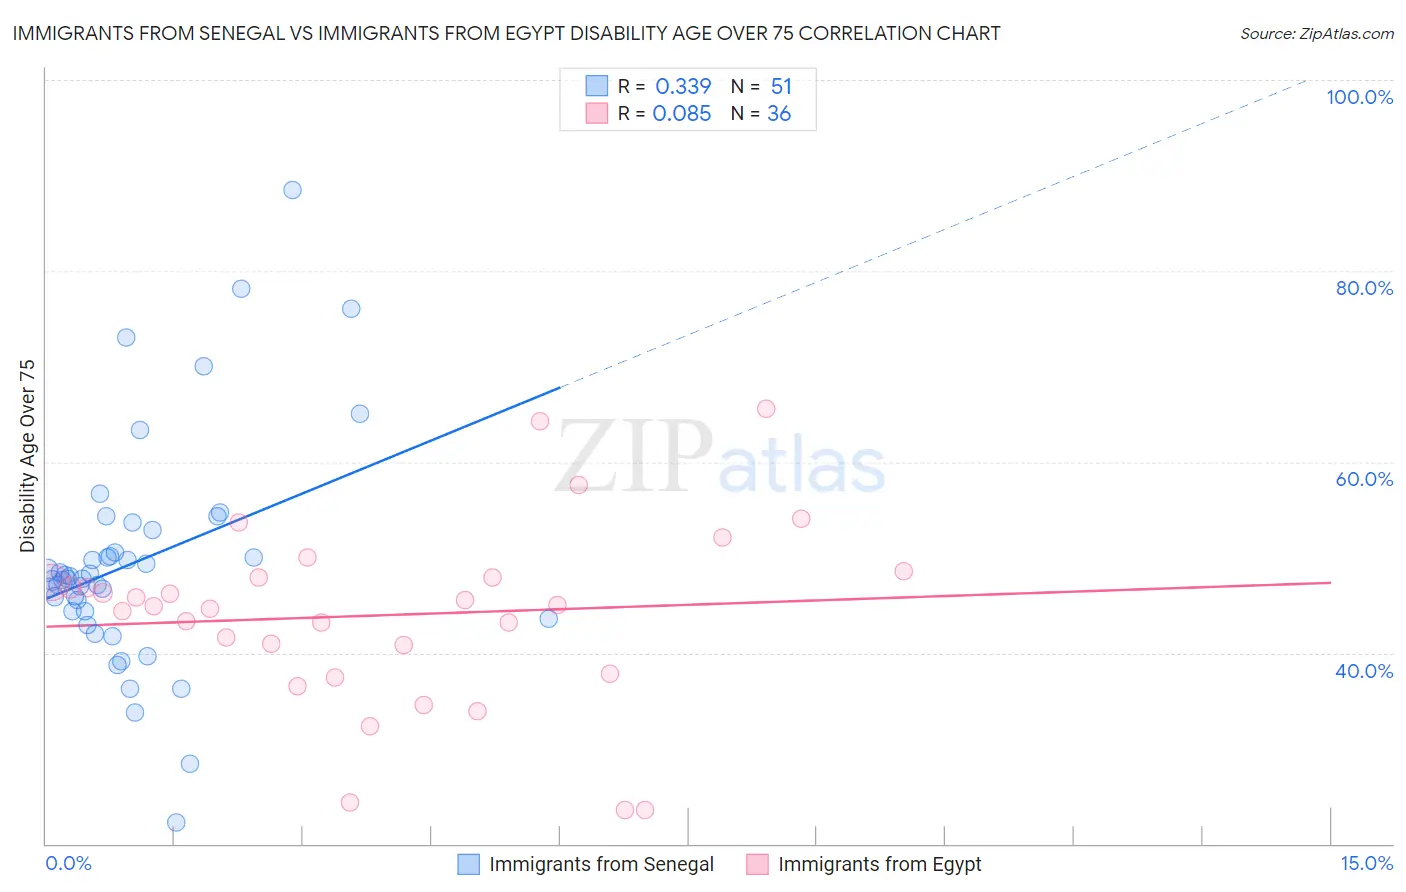 Immigrants from Senegal vs Immigrants from Egypt Disability Age Over 75